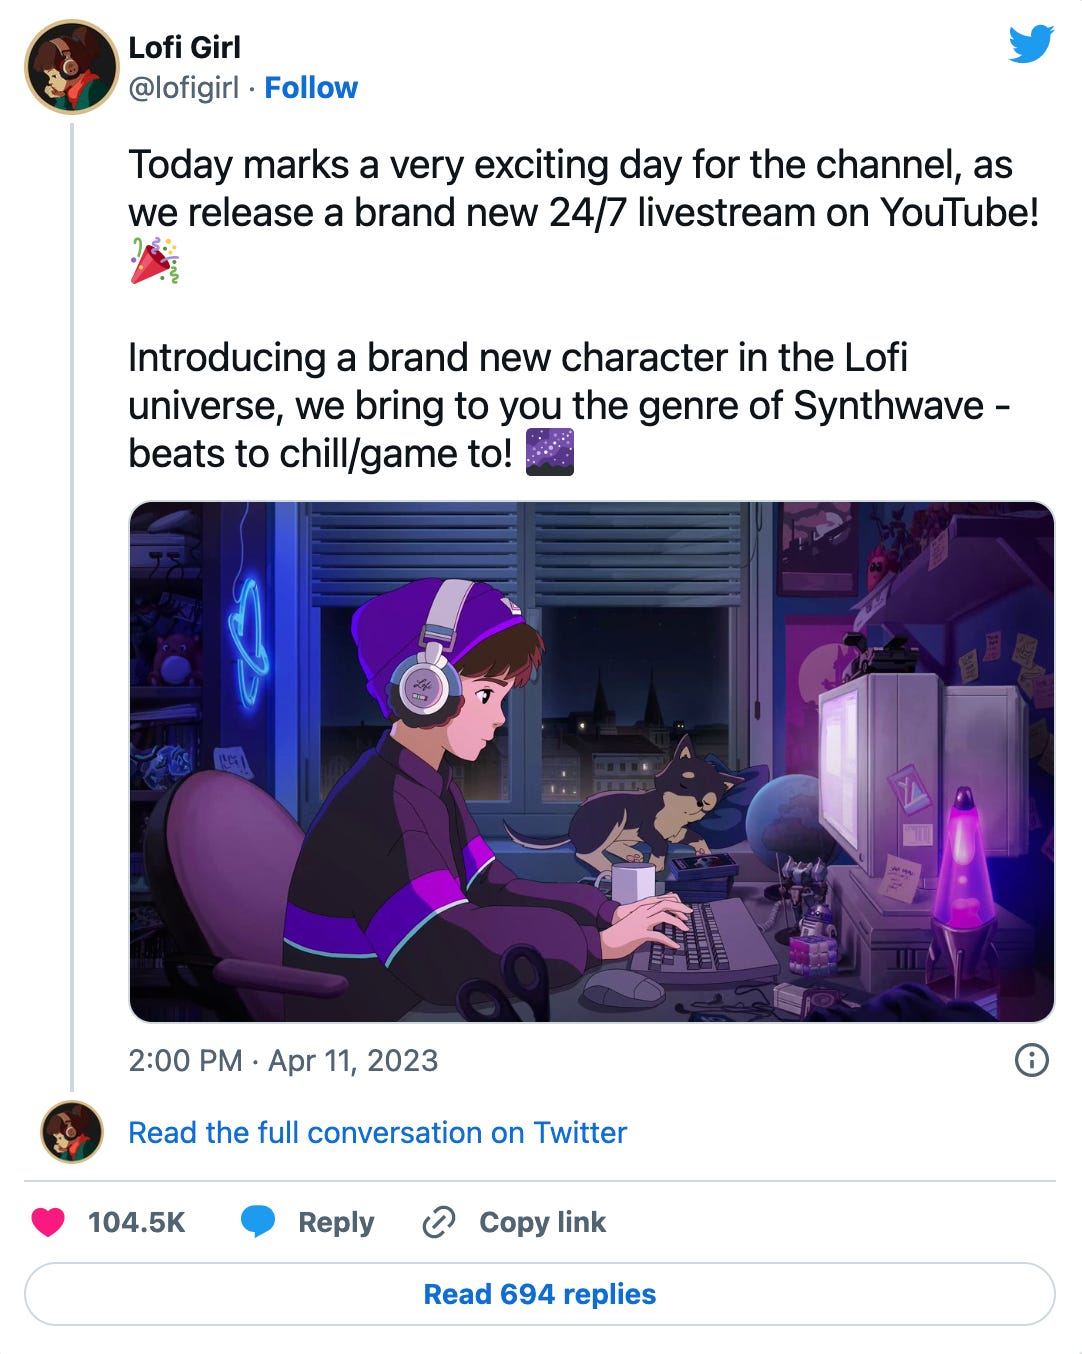 Tweet from @lofigirl announcing “Today marks a very exciting day for the channel, as we release a brand new 24/7 livestream on YouTube! Introducing a brand new character in the Lofi universe, we bring to you the genre of Synthwave - beats to chill/game to!” 